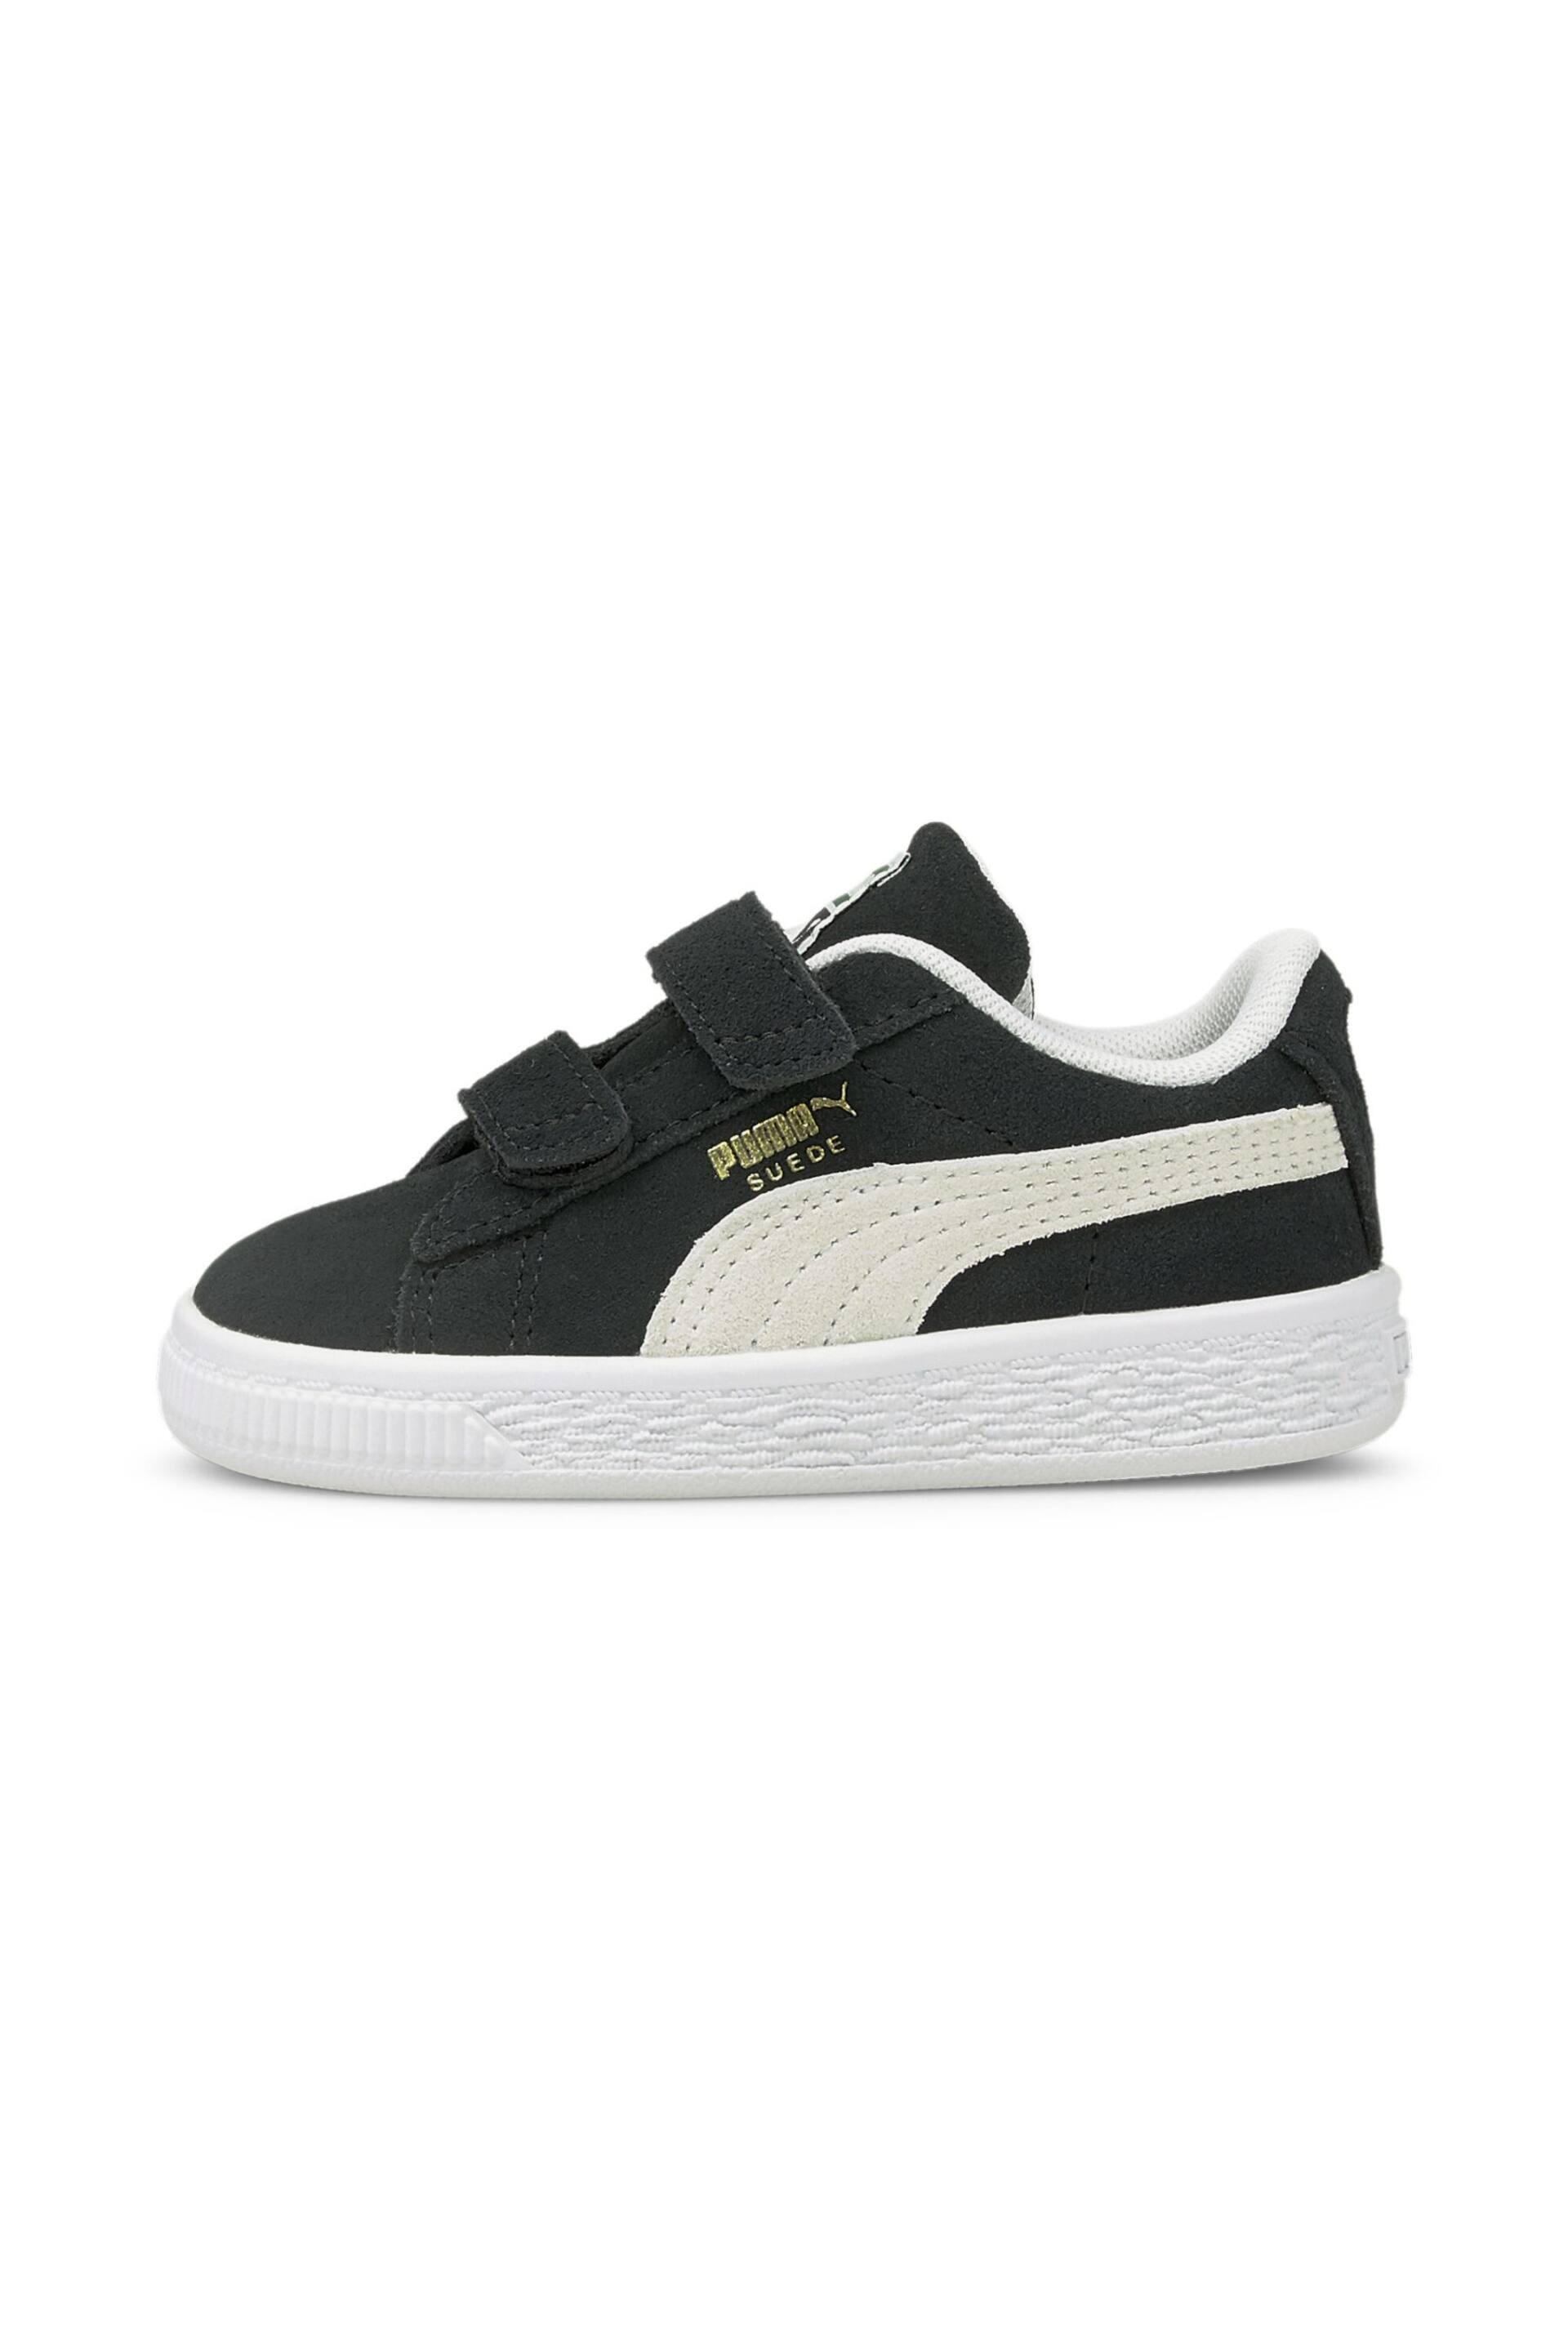 Puma Black Babies Suede Classic XXI Trainers - Image 5 of 11